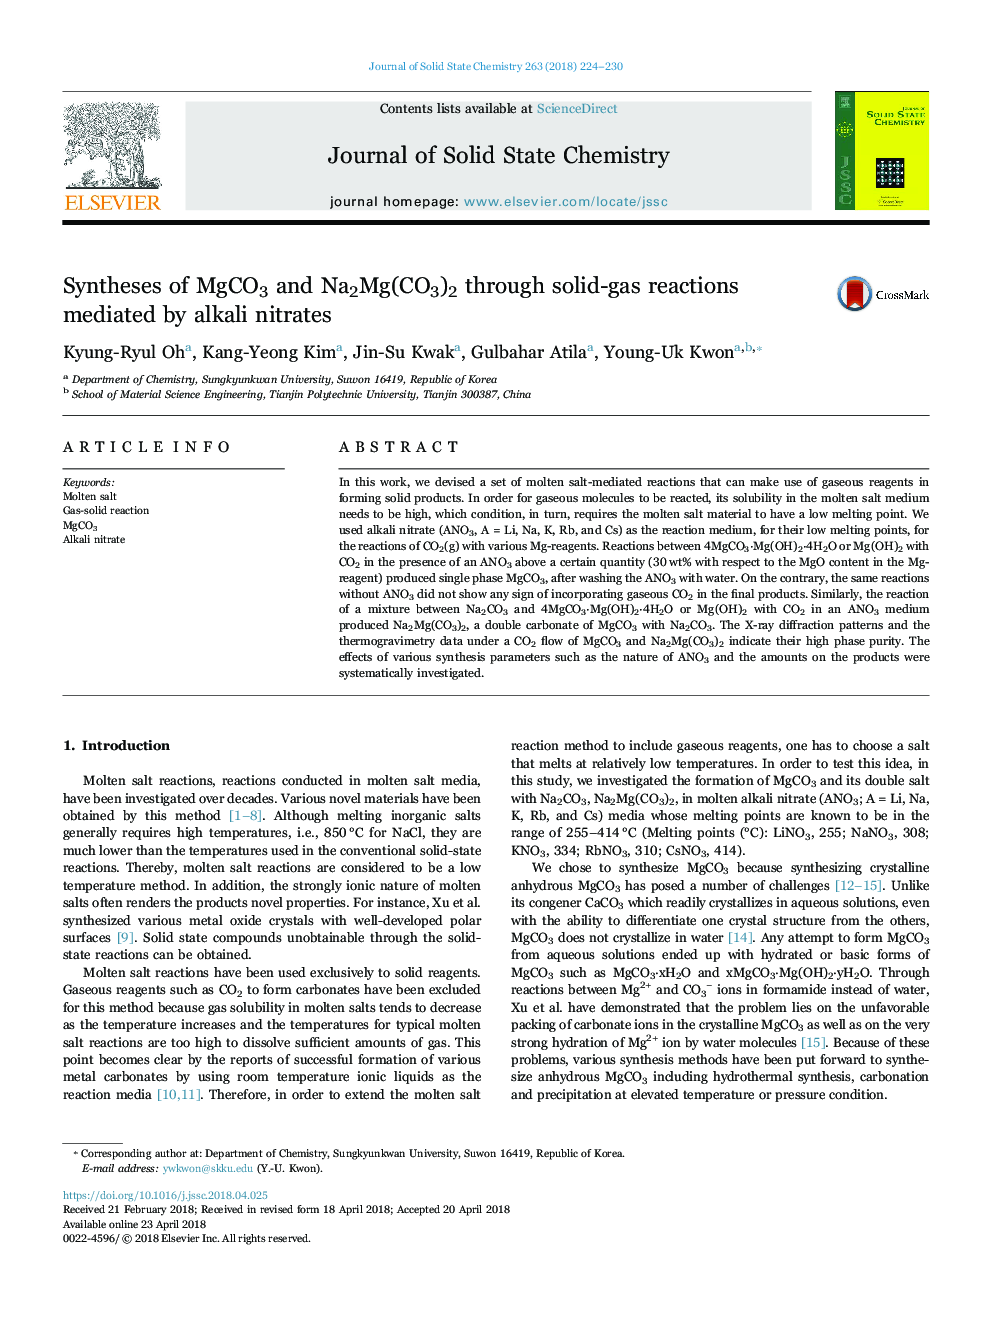 Syntheses of MgCO3 and Na2Mg(CO3)2 through solid-gas reactions mediated by alkali nitrates